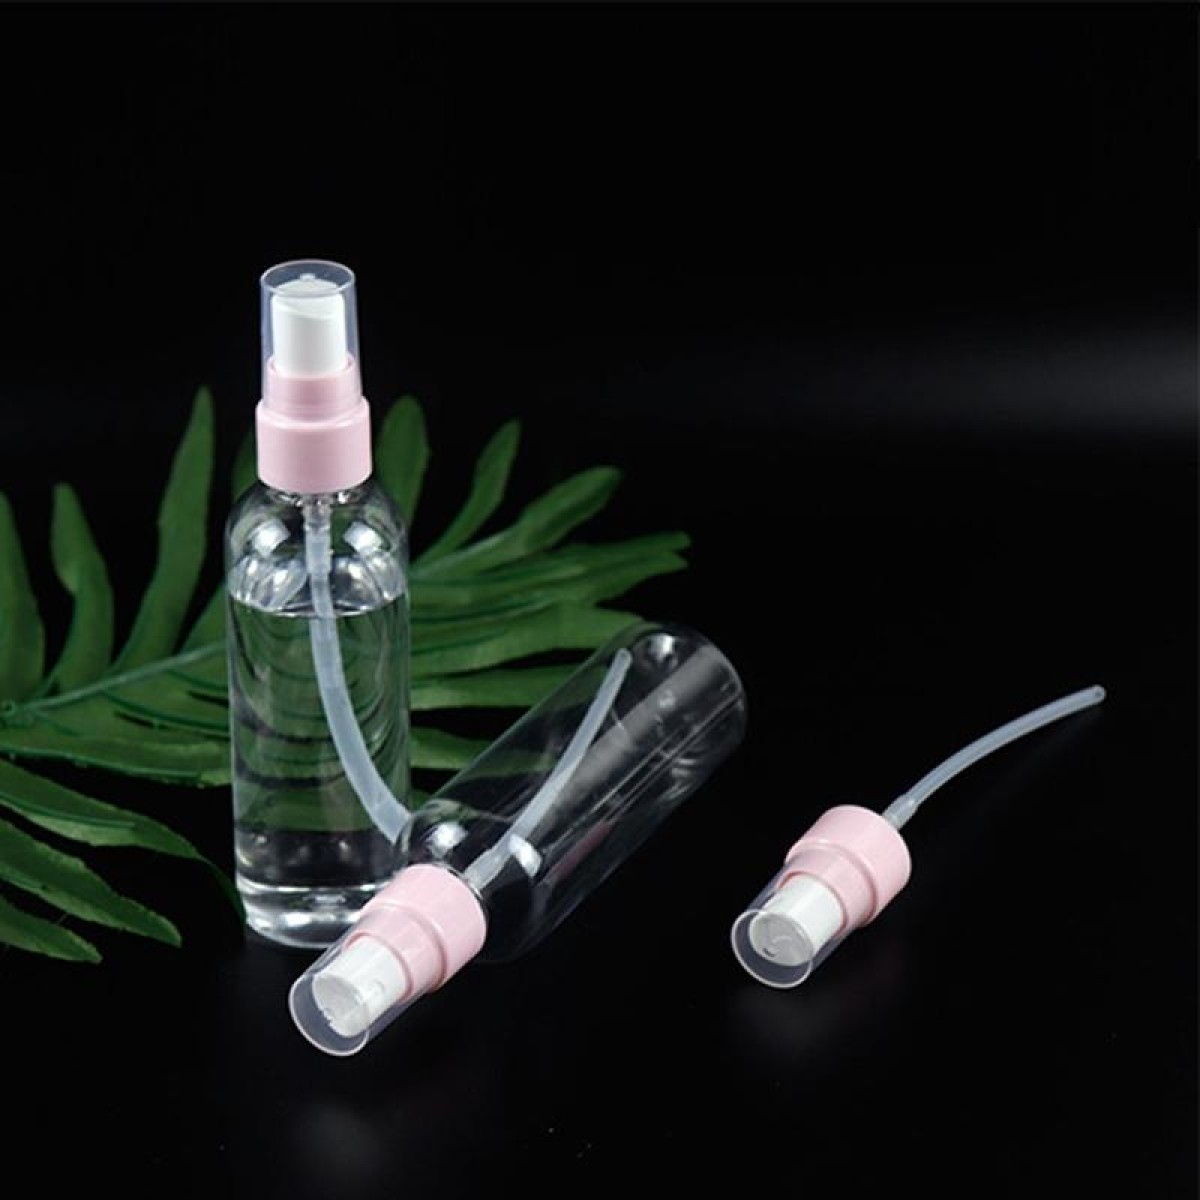 10 PCS 100ML Disinfection Spray Bottle Alcohol 84 Disinfection Solution Watering Can, Random Nozzle Color Delivery